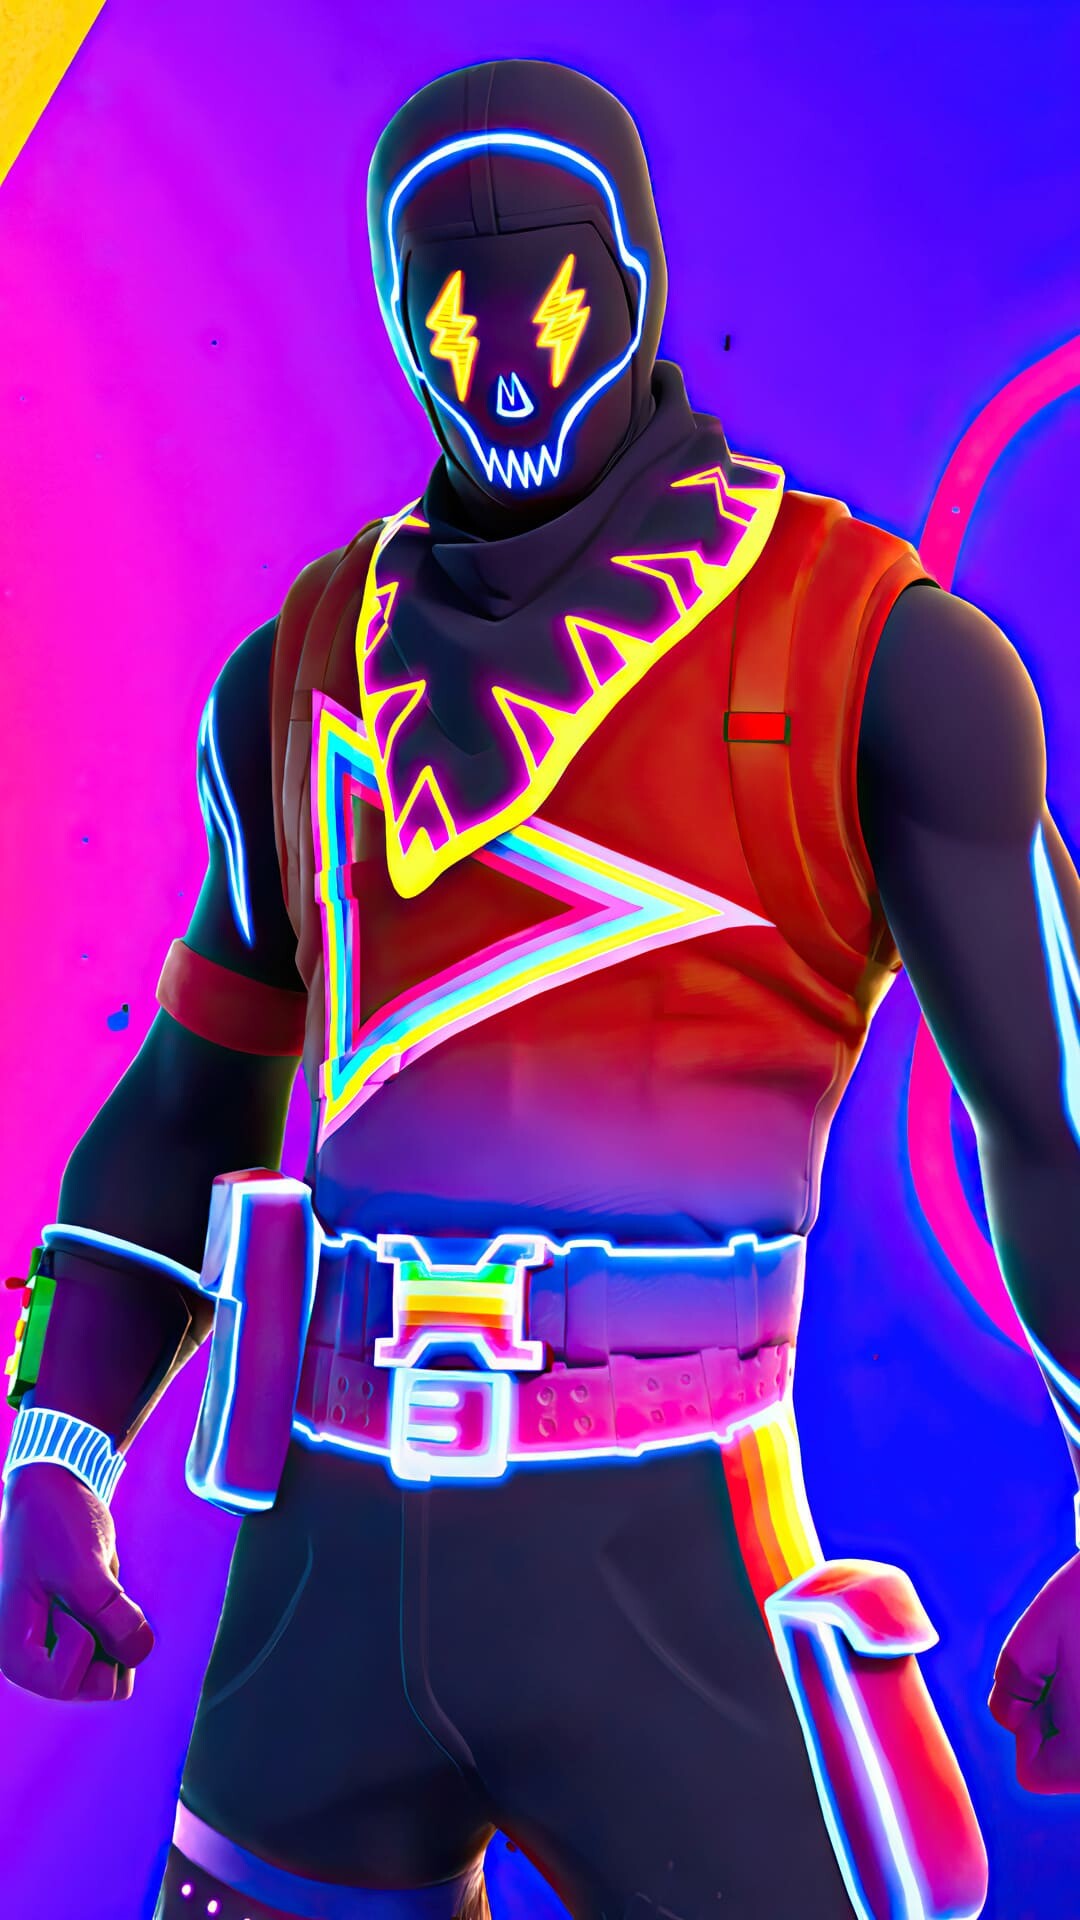 Fortnite: The most popular battle royale game worldwide. 1080x1920 Full HD Background.